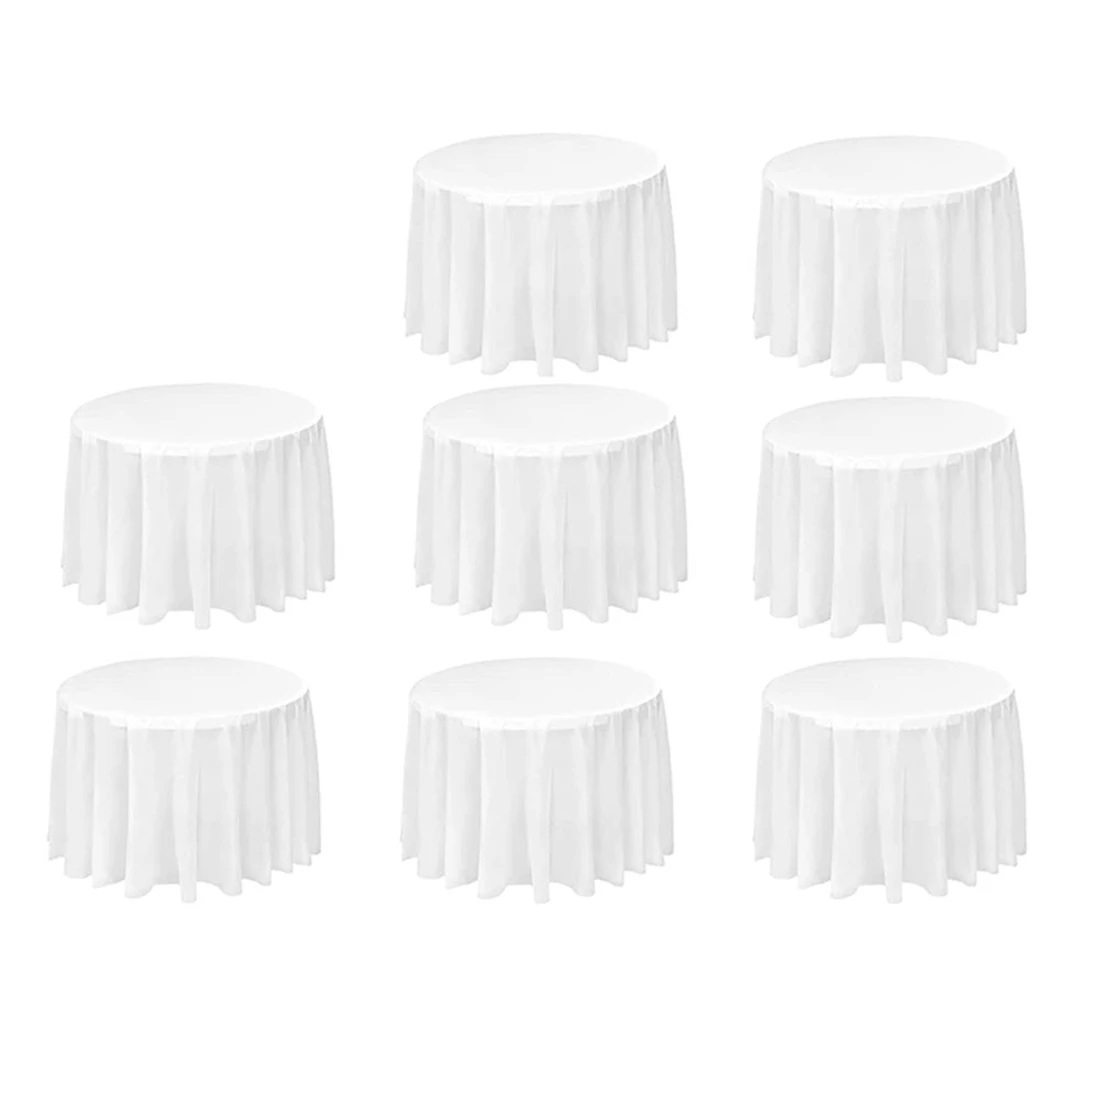 

8 Pack Round Tablecloth, 84 Inch White Disposable Table Covers PEVA Waterproof Plastic Round Tablecloths (White)